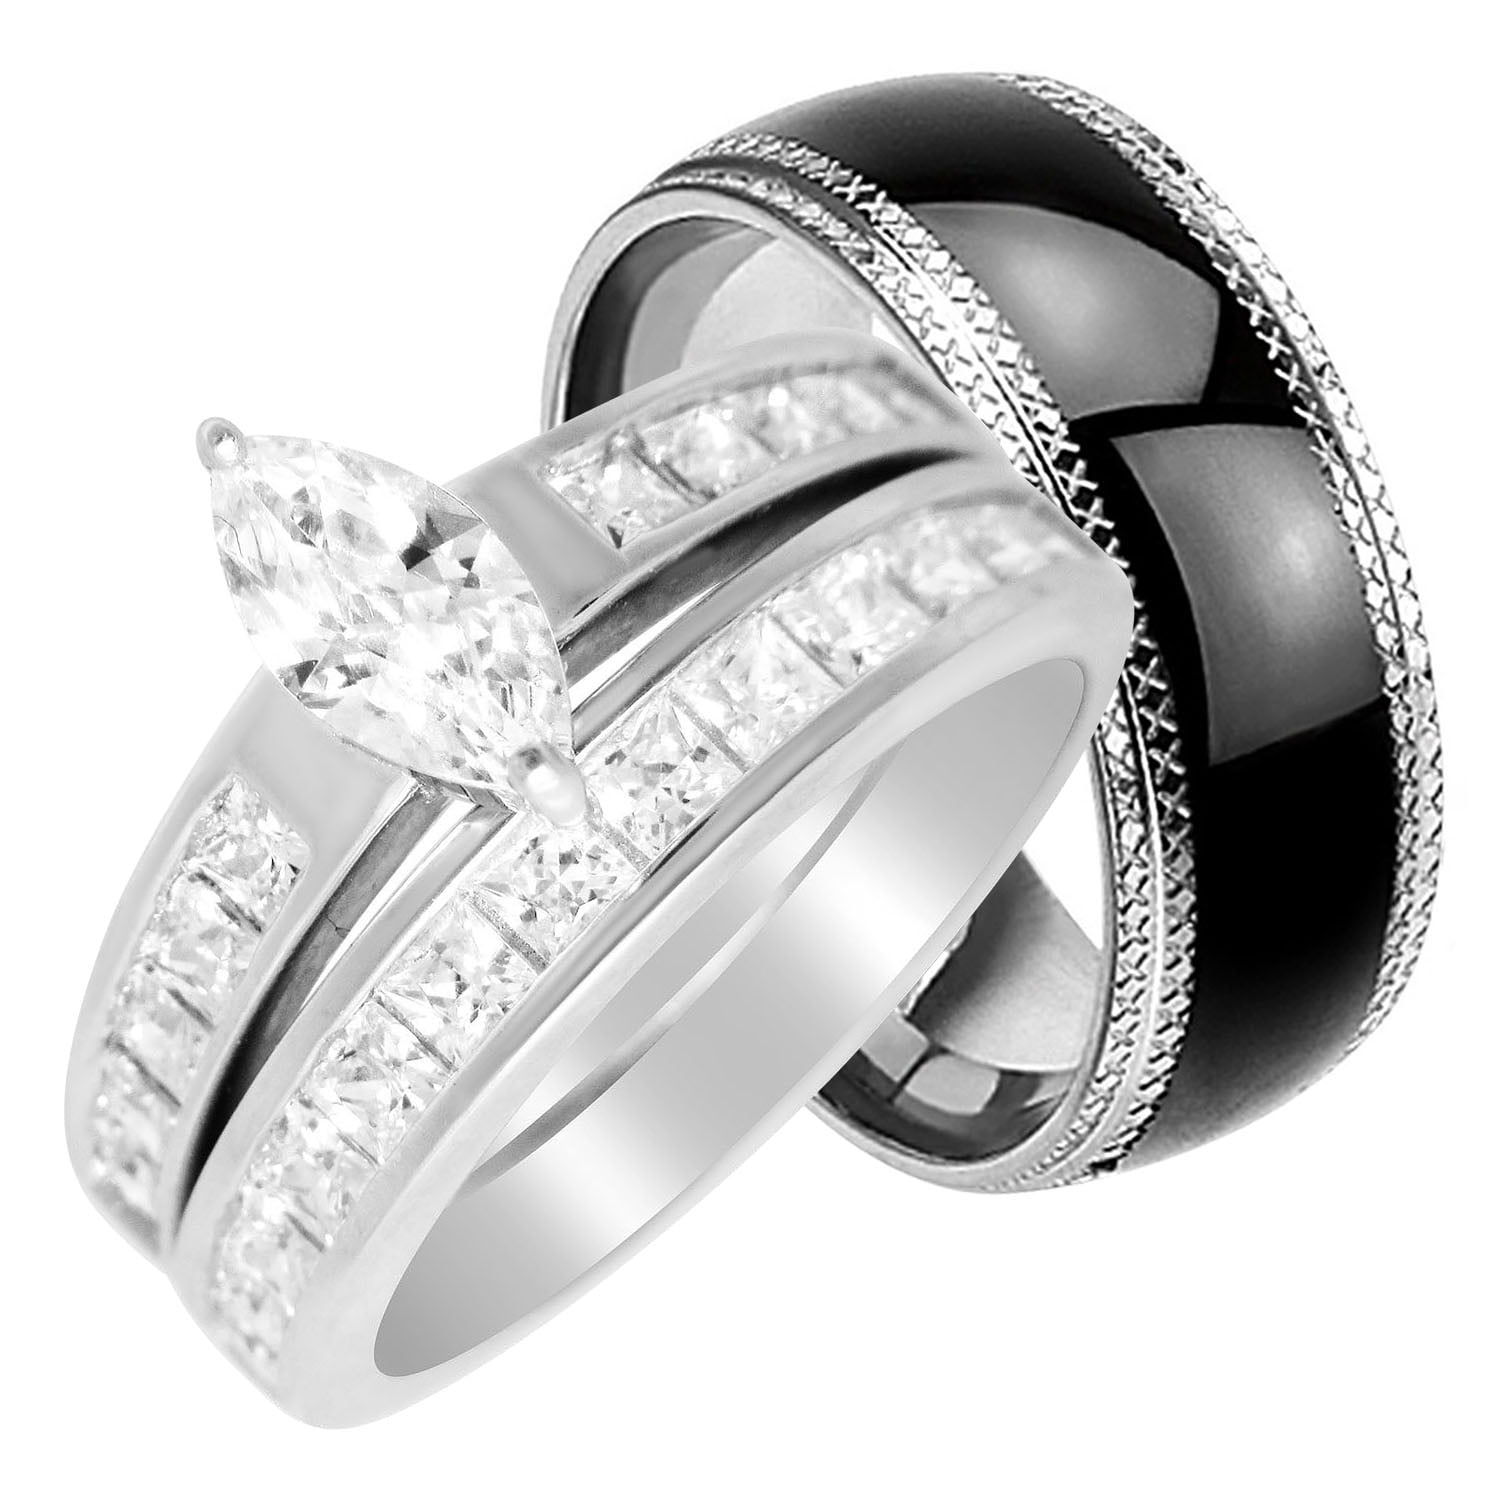 LaRaso & Co - His Hers Wedding Rings Set Cheap Matching Wedding Bands for Him Size 11 and Her ...